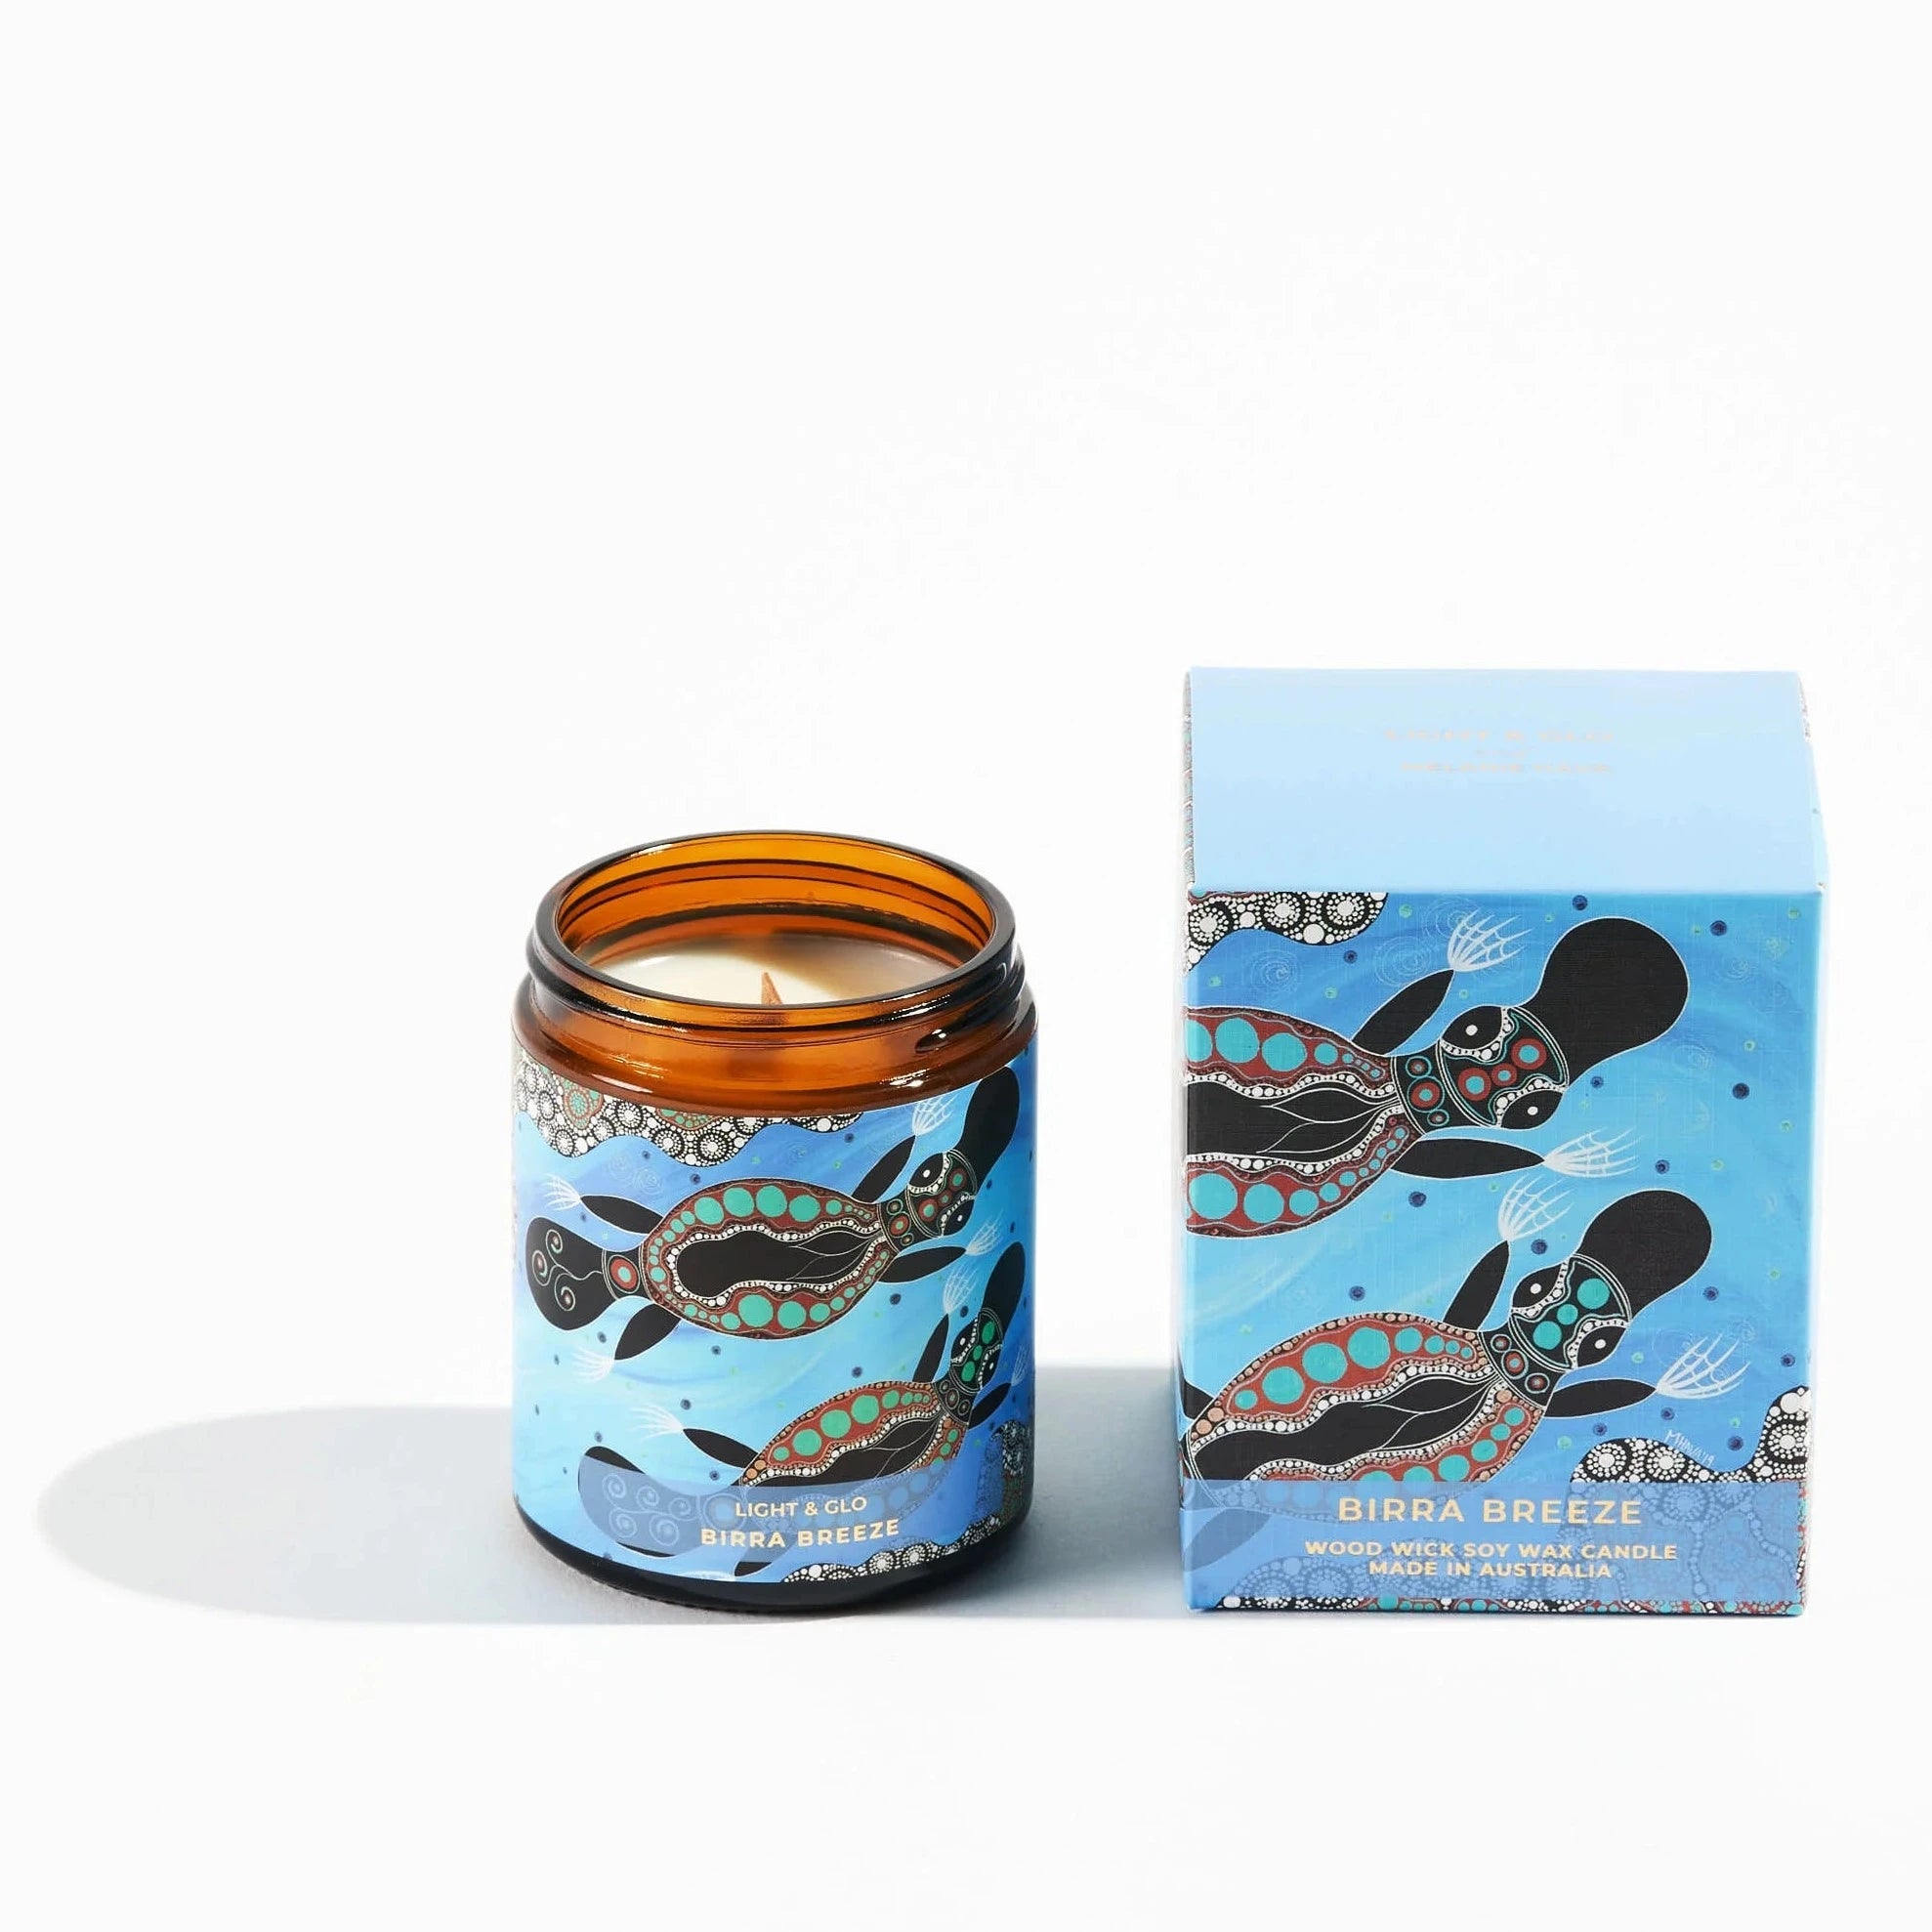 Candle in brown jar with platypus aboriginal design on label sitting next to a gift box with the same design.